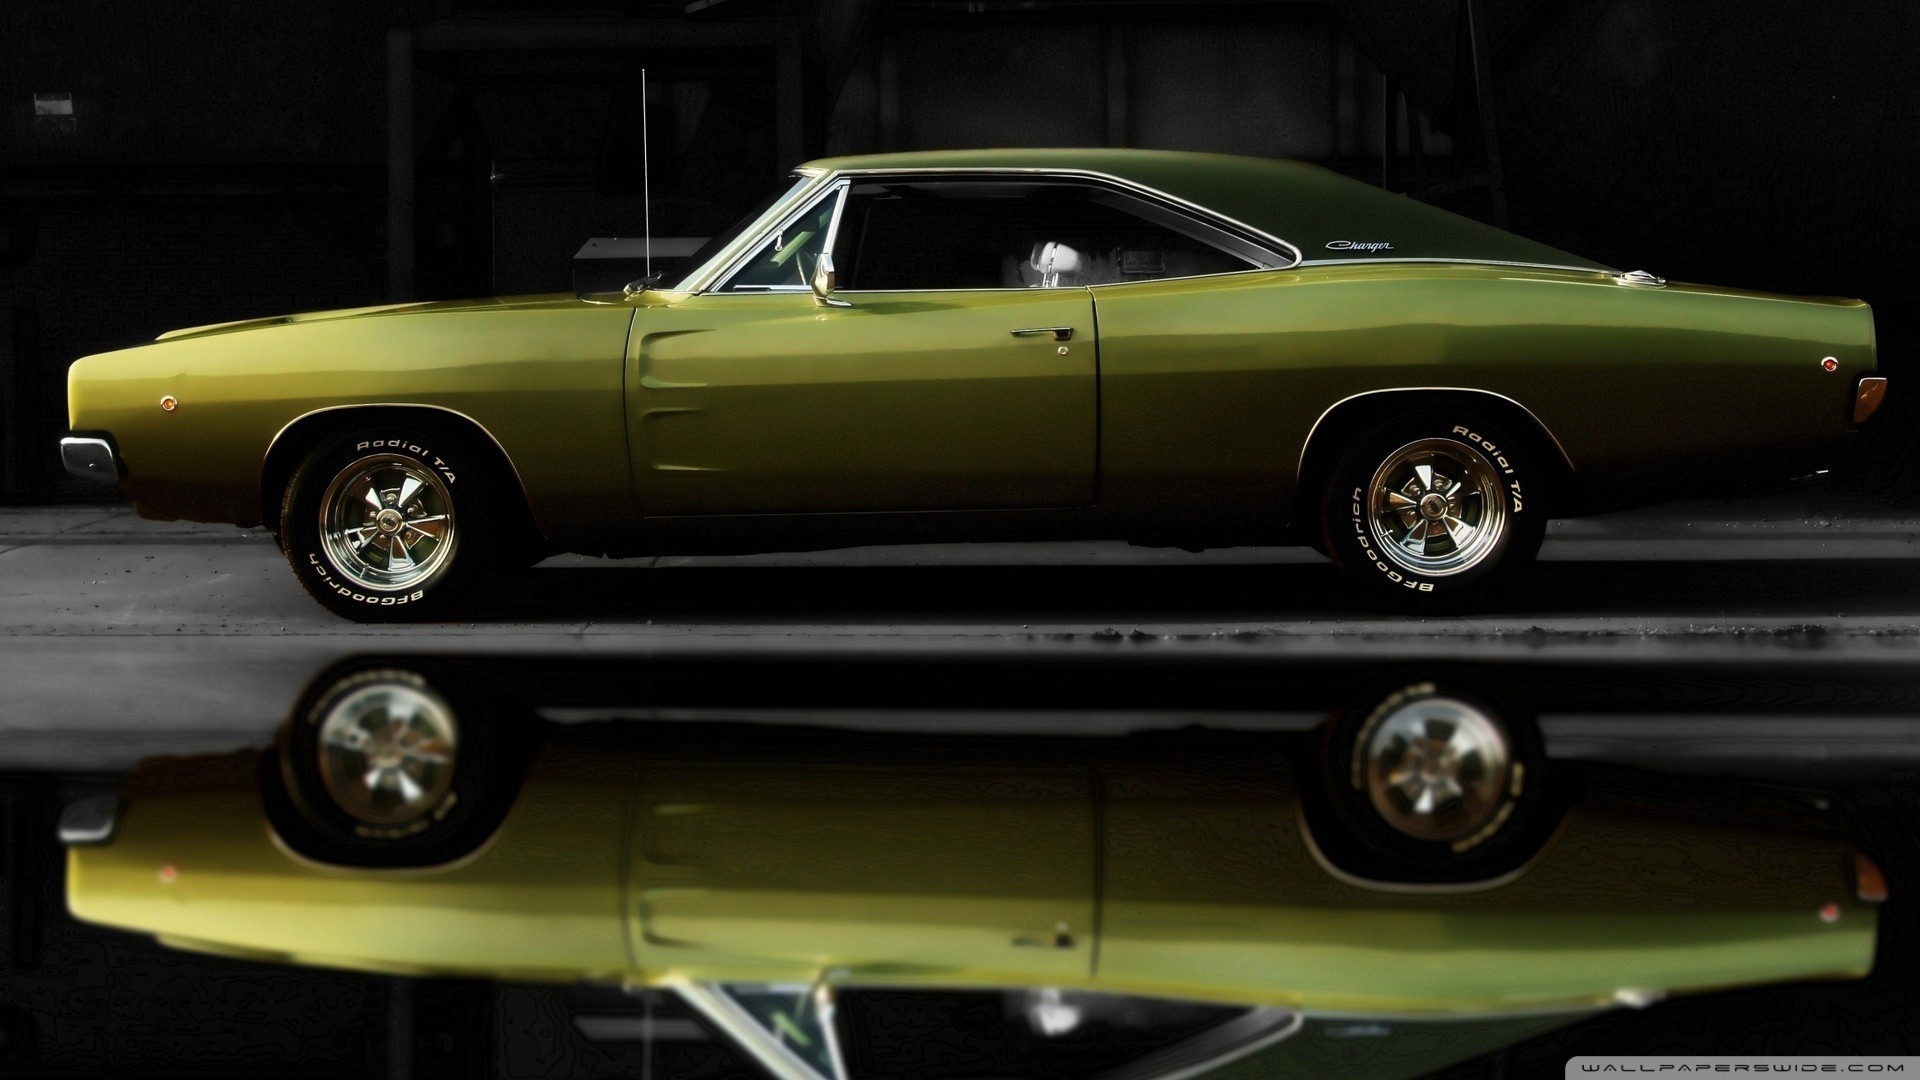 1968 Dodge Charger - Dash Parts 1970 Plymouth Cuda , HD Wallpaper & Backgrounds